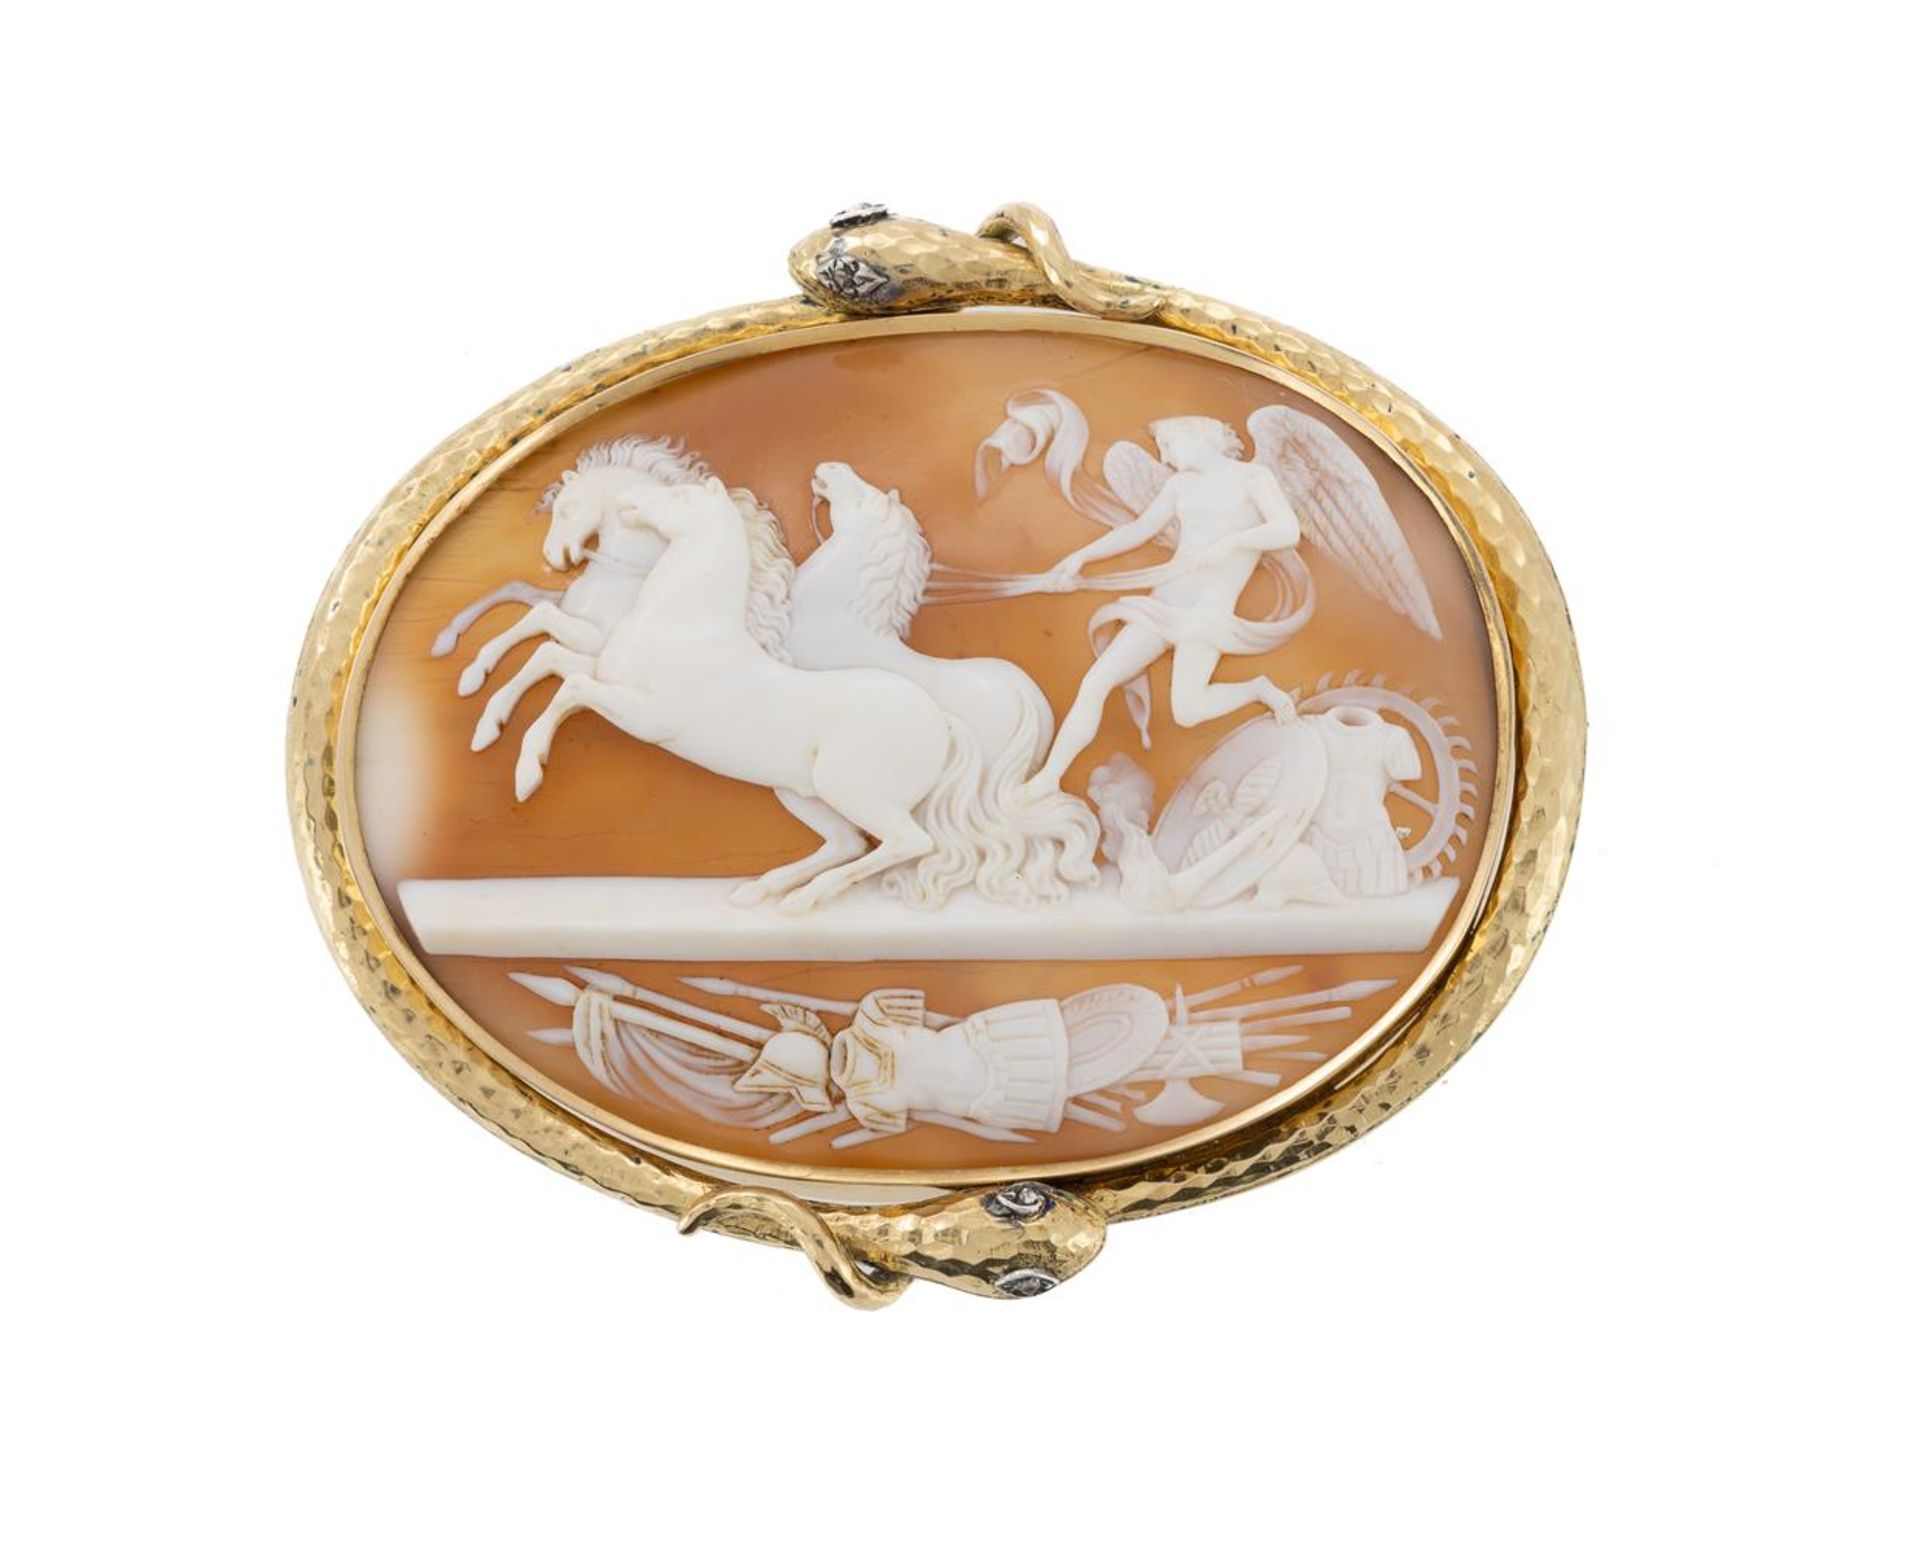 A MID VICTORIAN SHELL CAMEO BROOCH IN ENTWINED SERPENT SETTING, CIRCA 1870